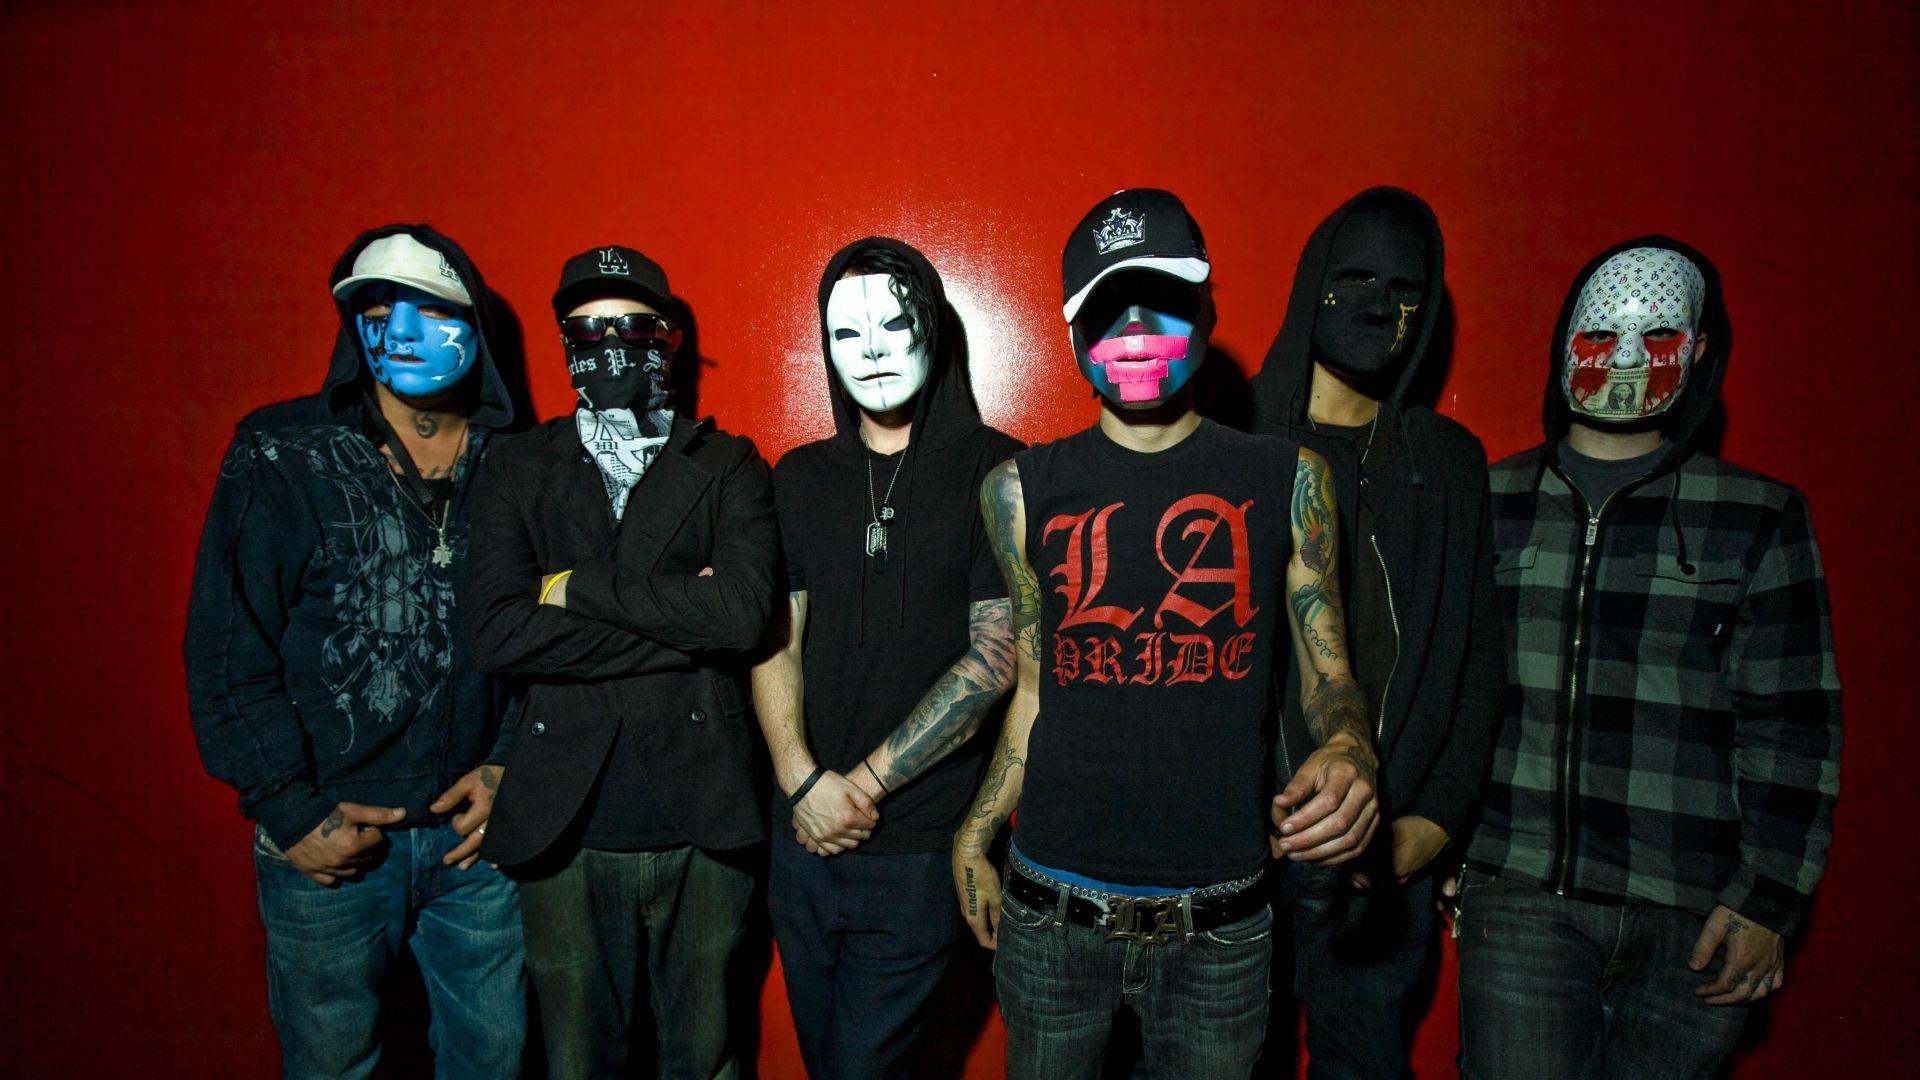 Download Wallpaper X Hollywood Undead Band Members On Hollywood